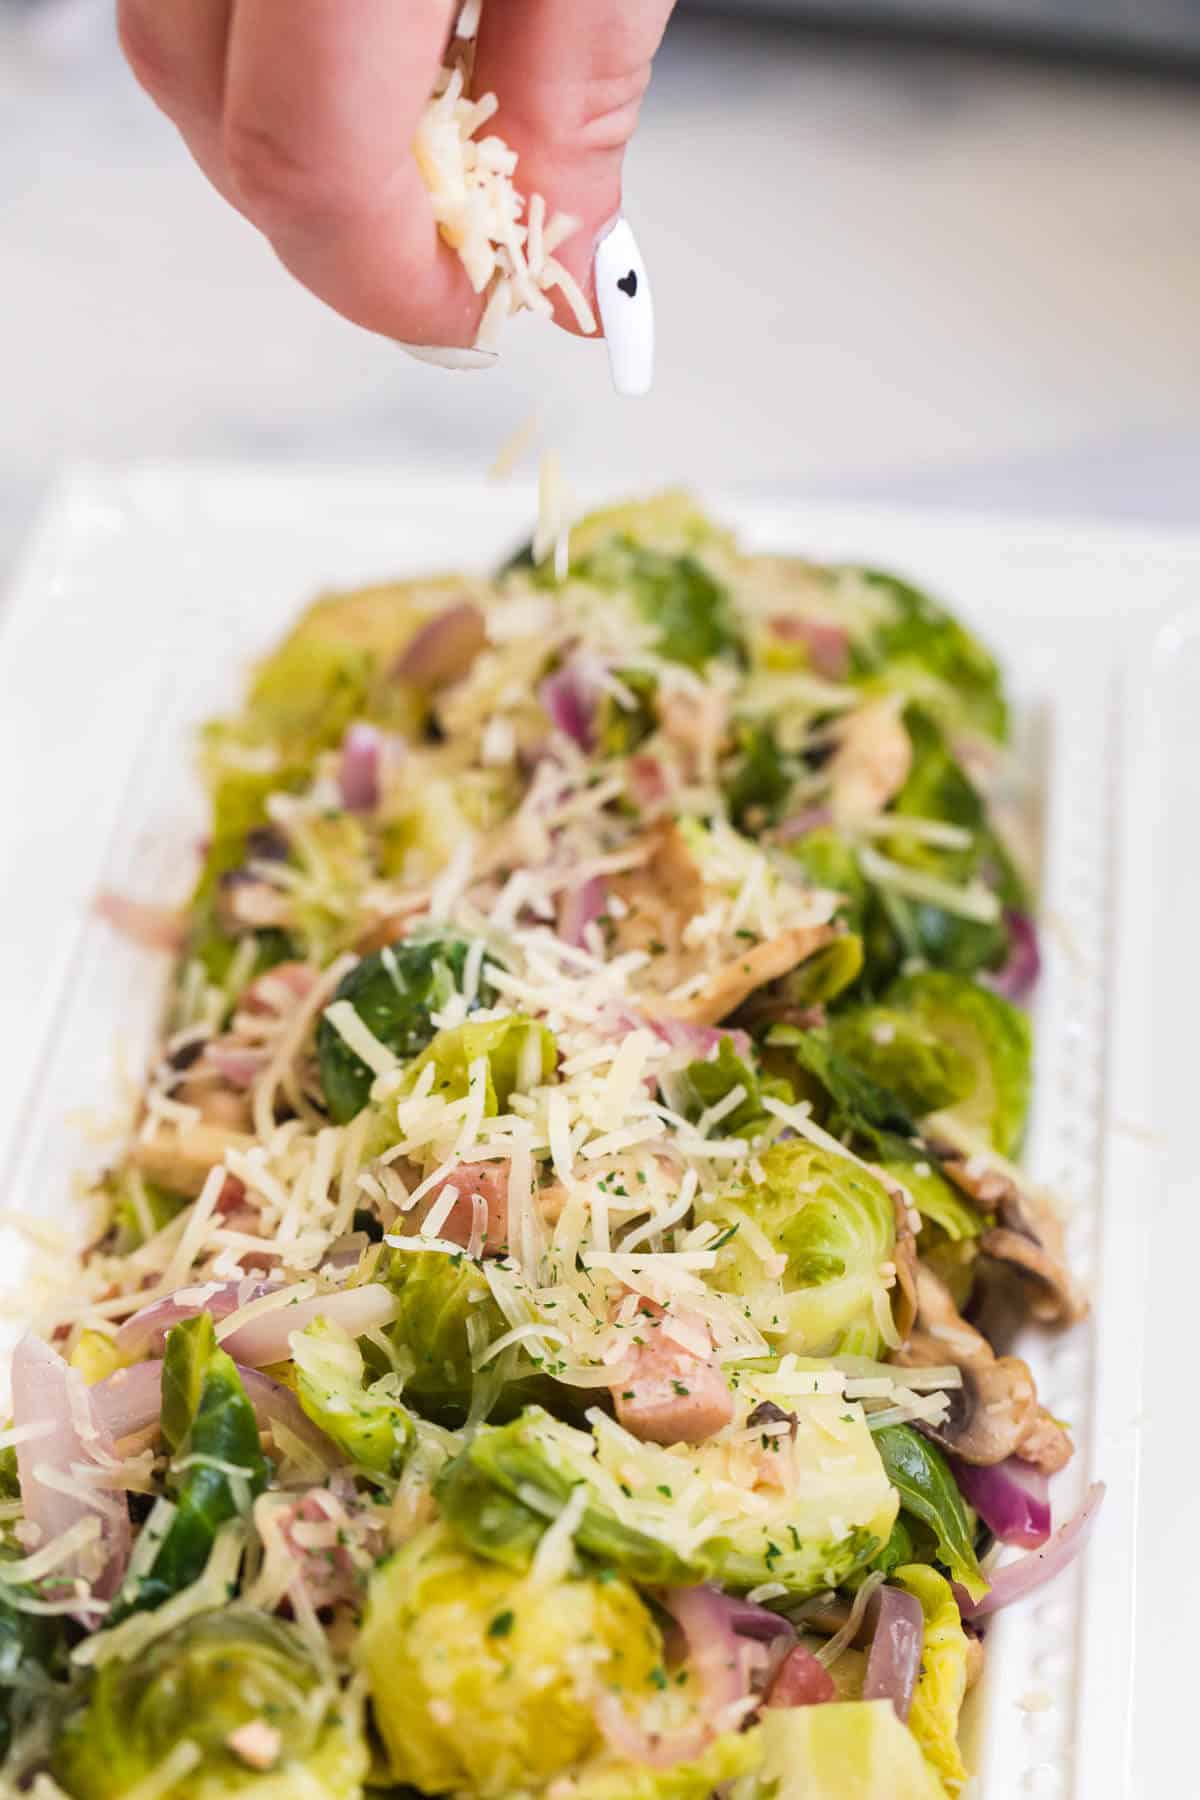 A hand sprinkling parmesan cheese on brussel sprouts.